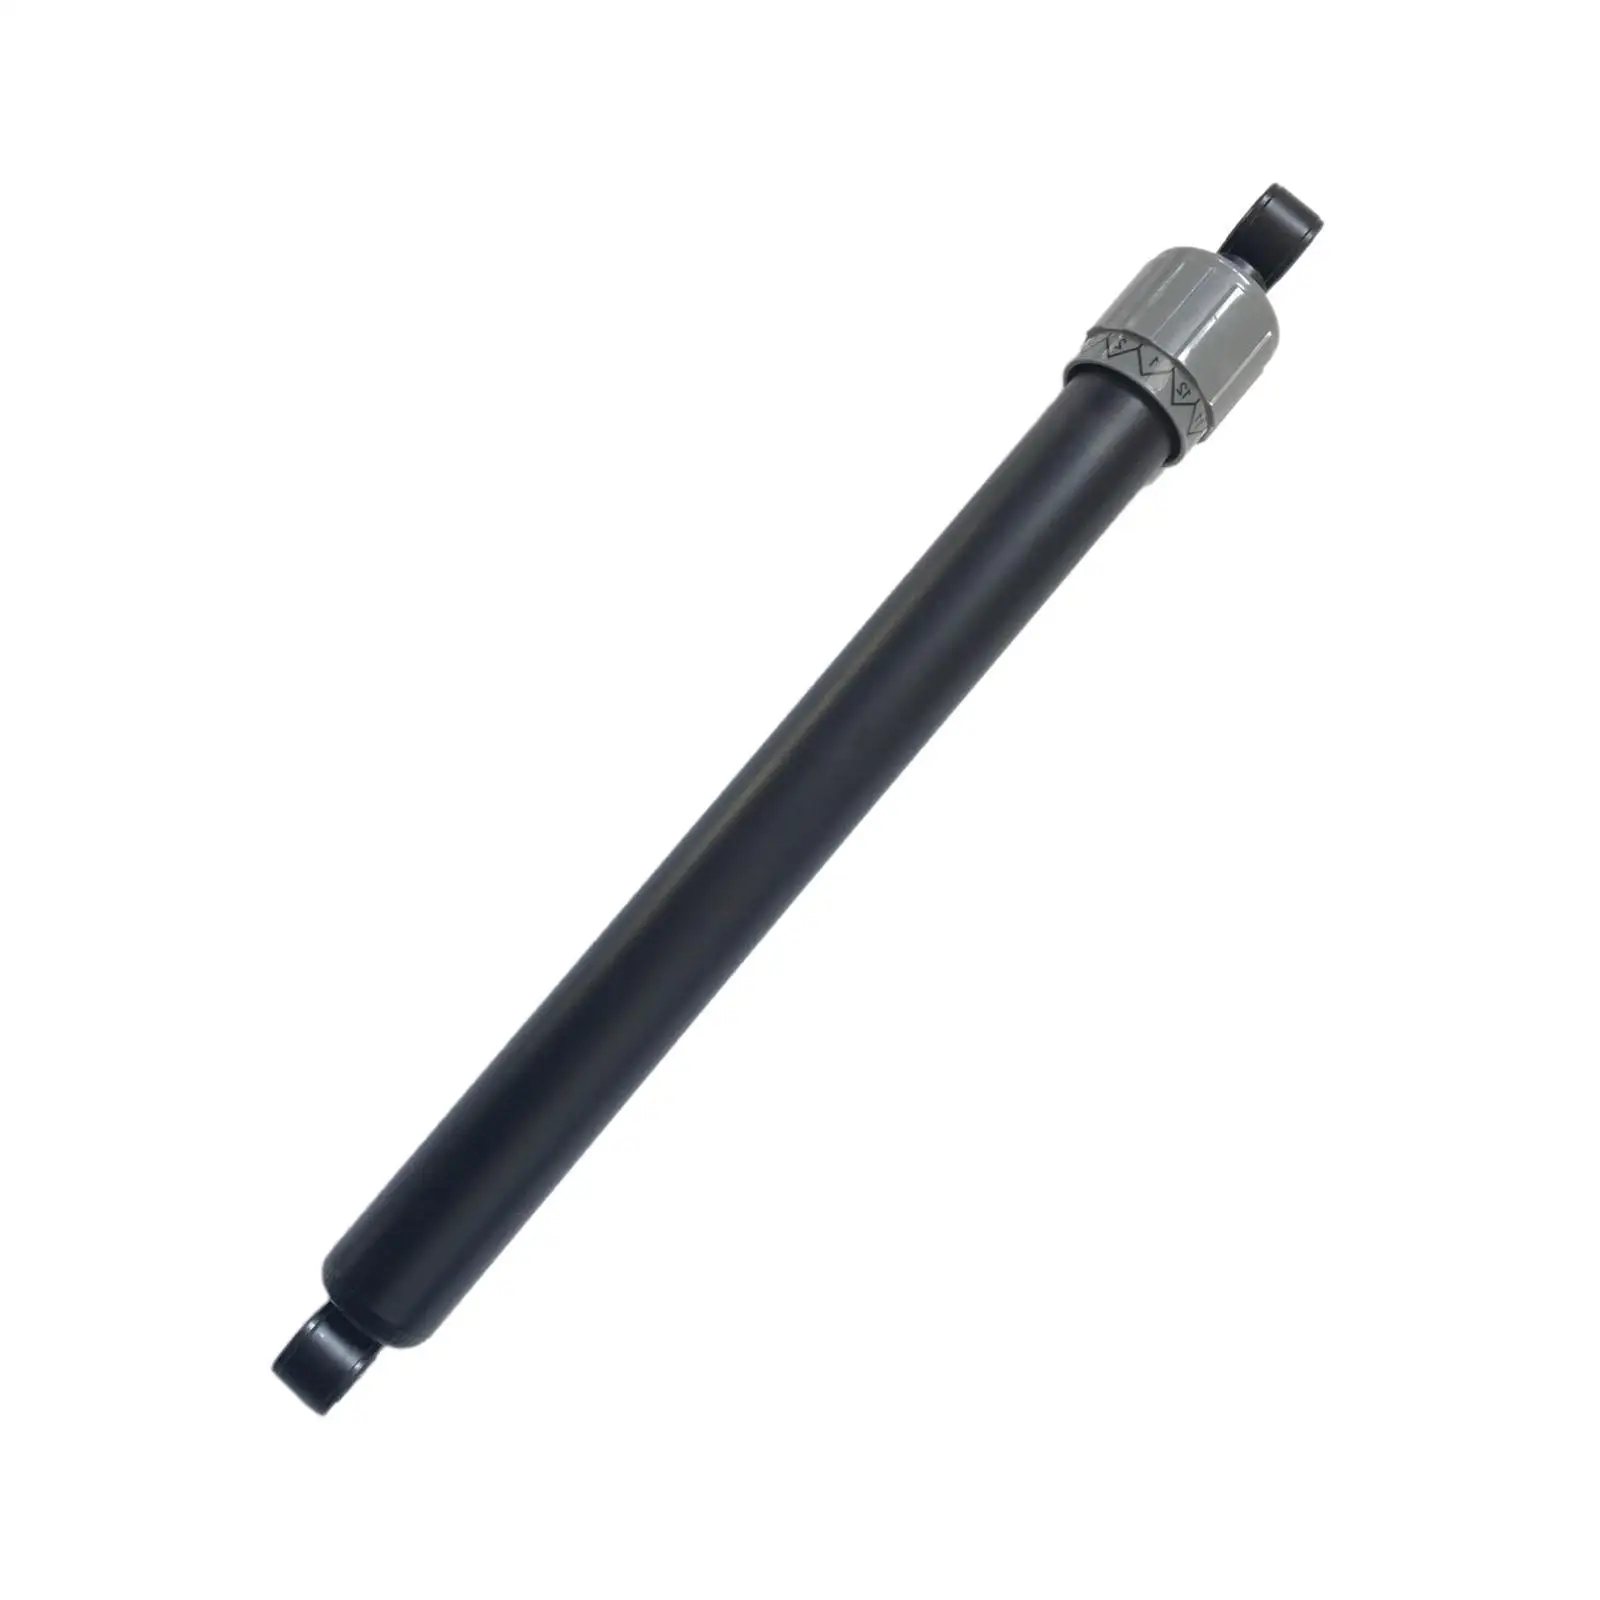 Damper Holder Hydraulic Cylinder Accessories Household Modification Accessories Modification Parts Replacement Gym for Rowers